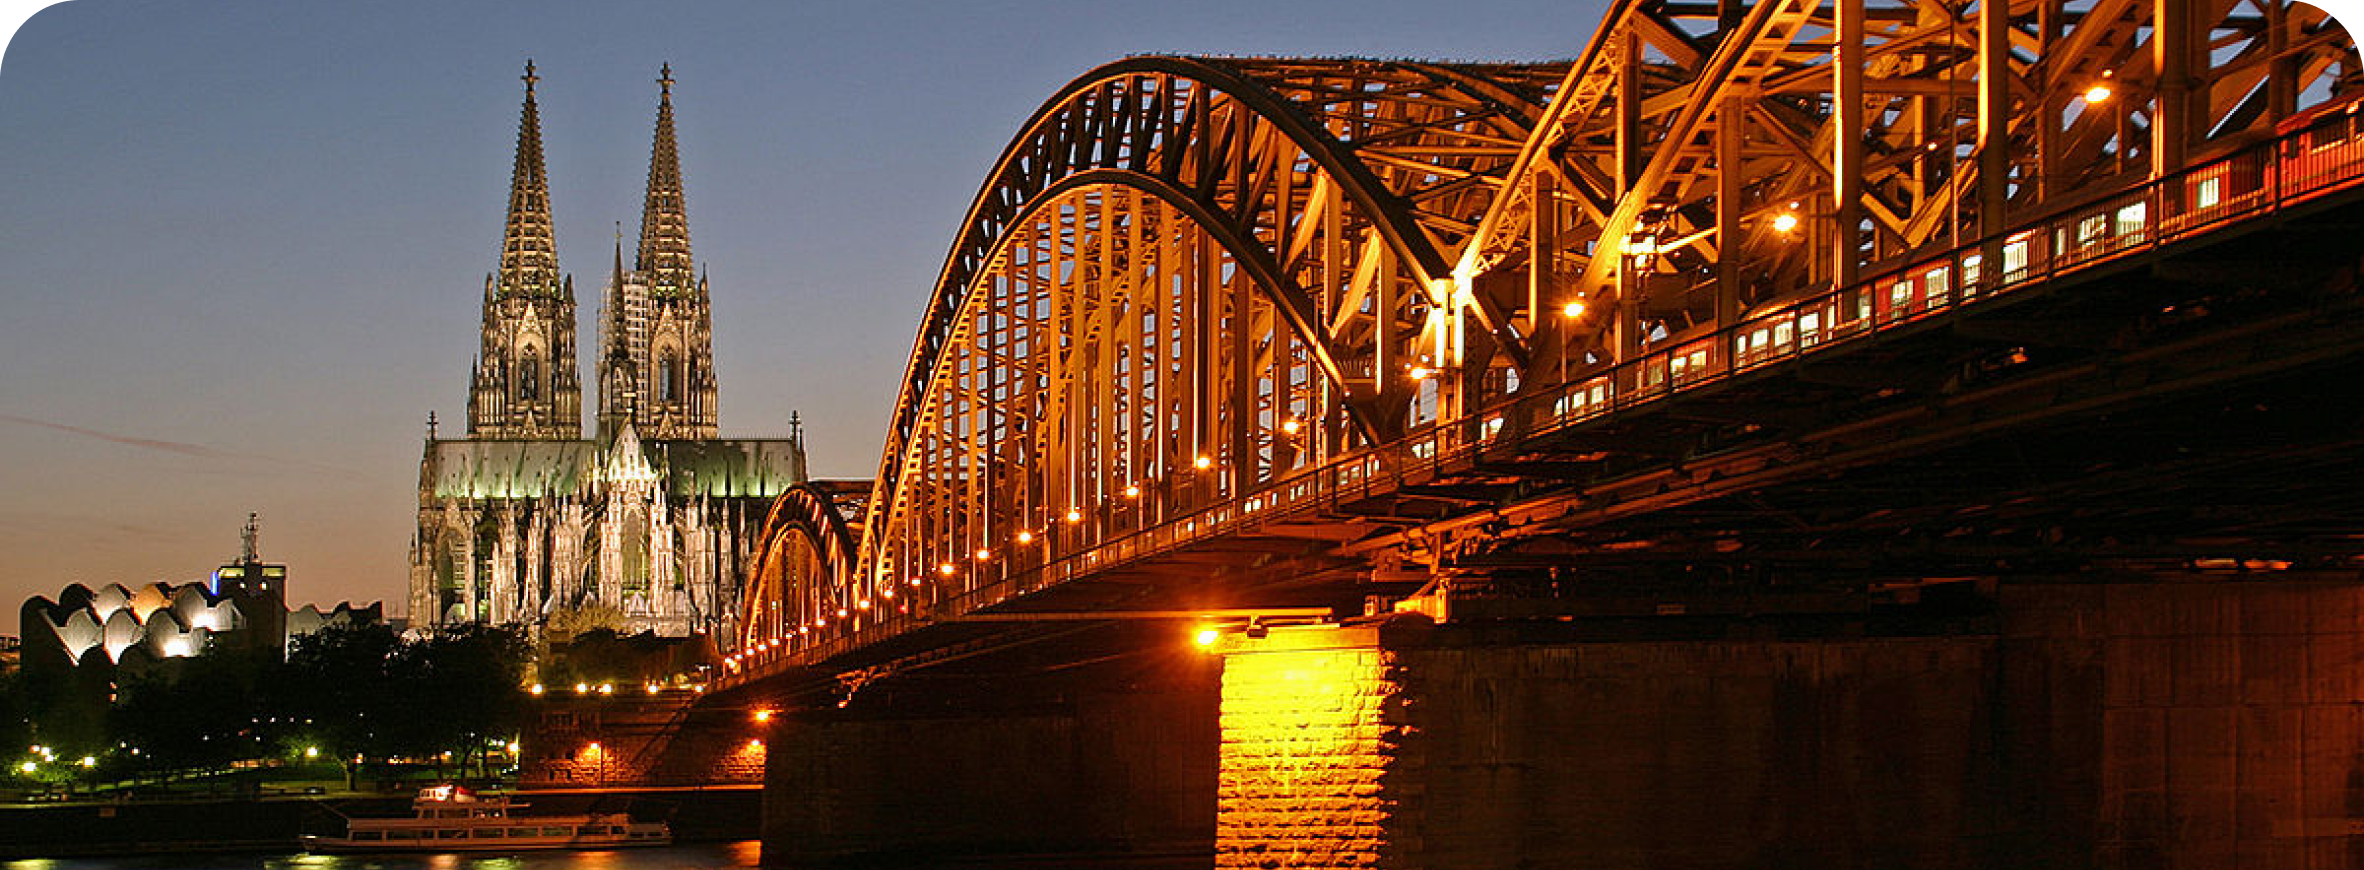 Rhein Energie cover image of an evening view in the city of Cologne, featuring a church and bridge.